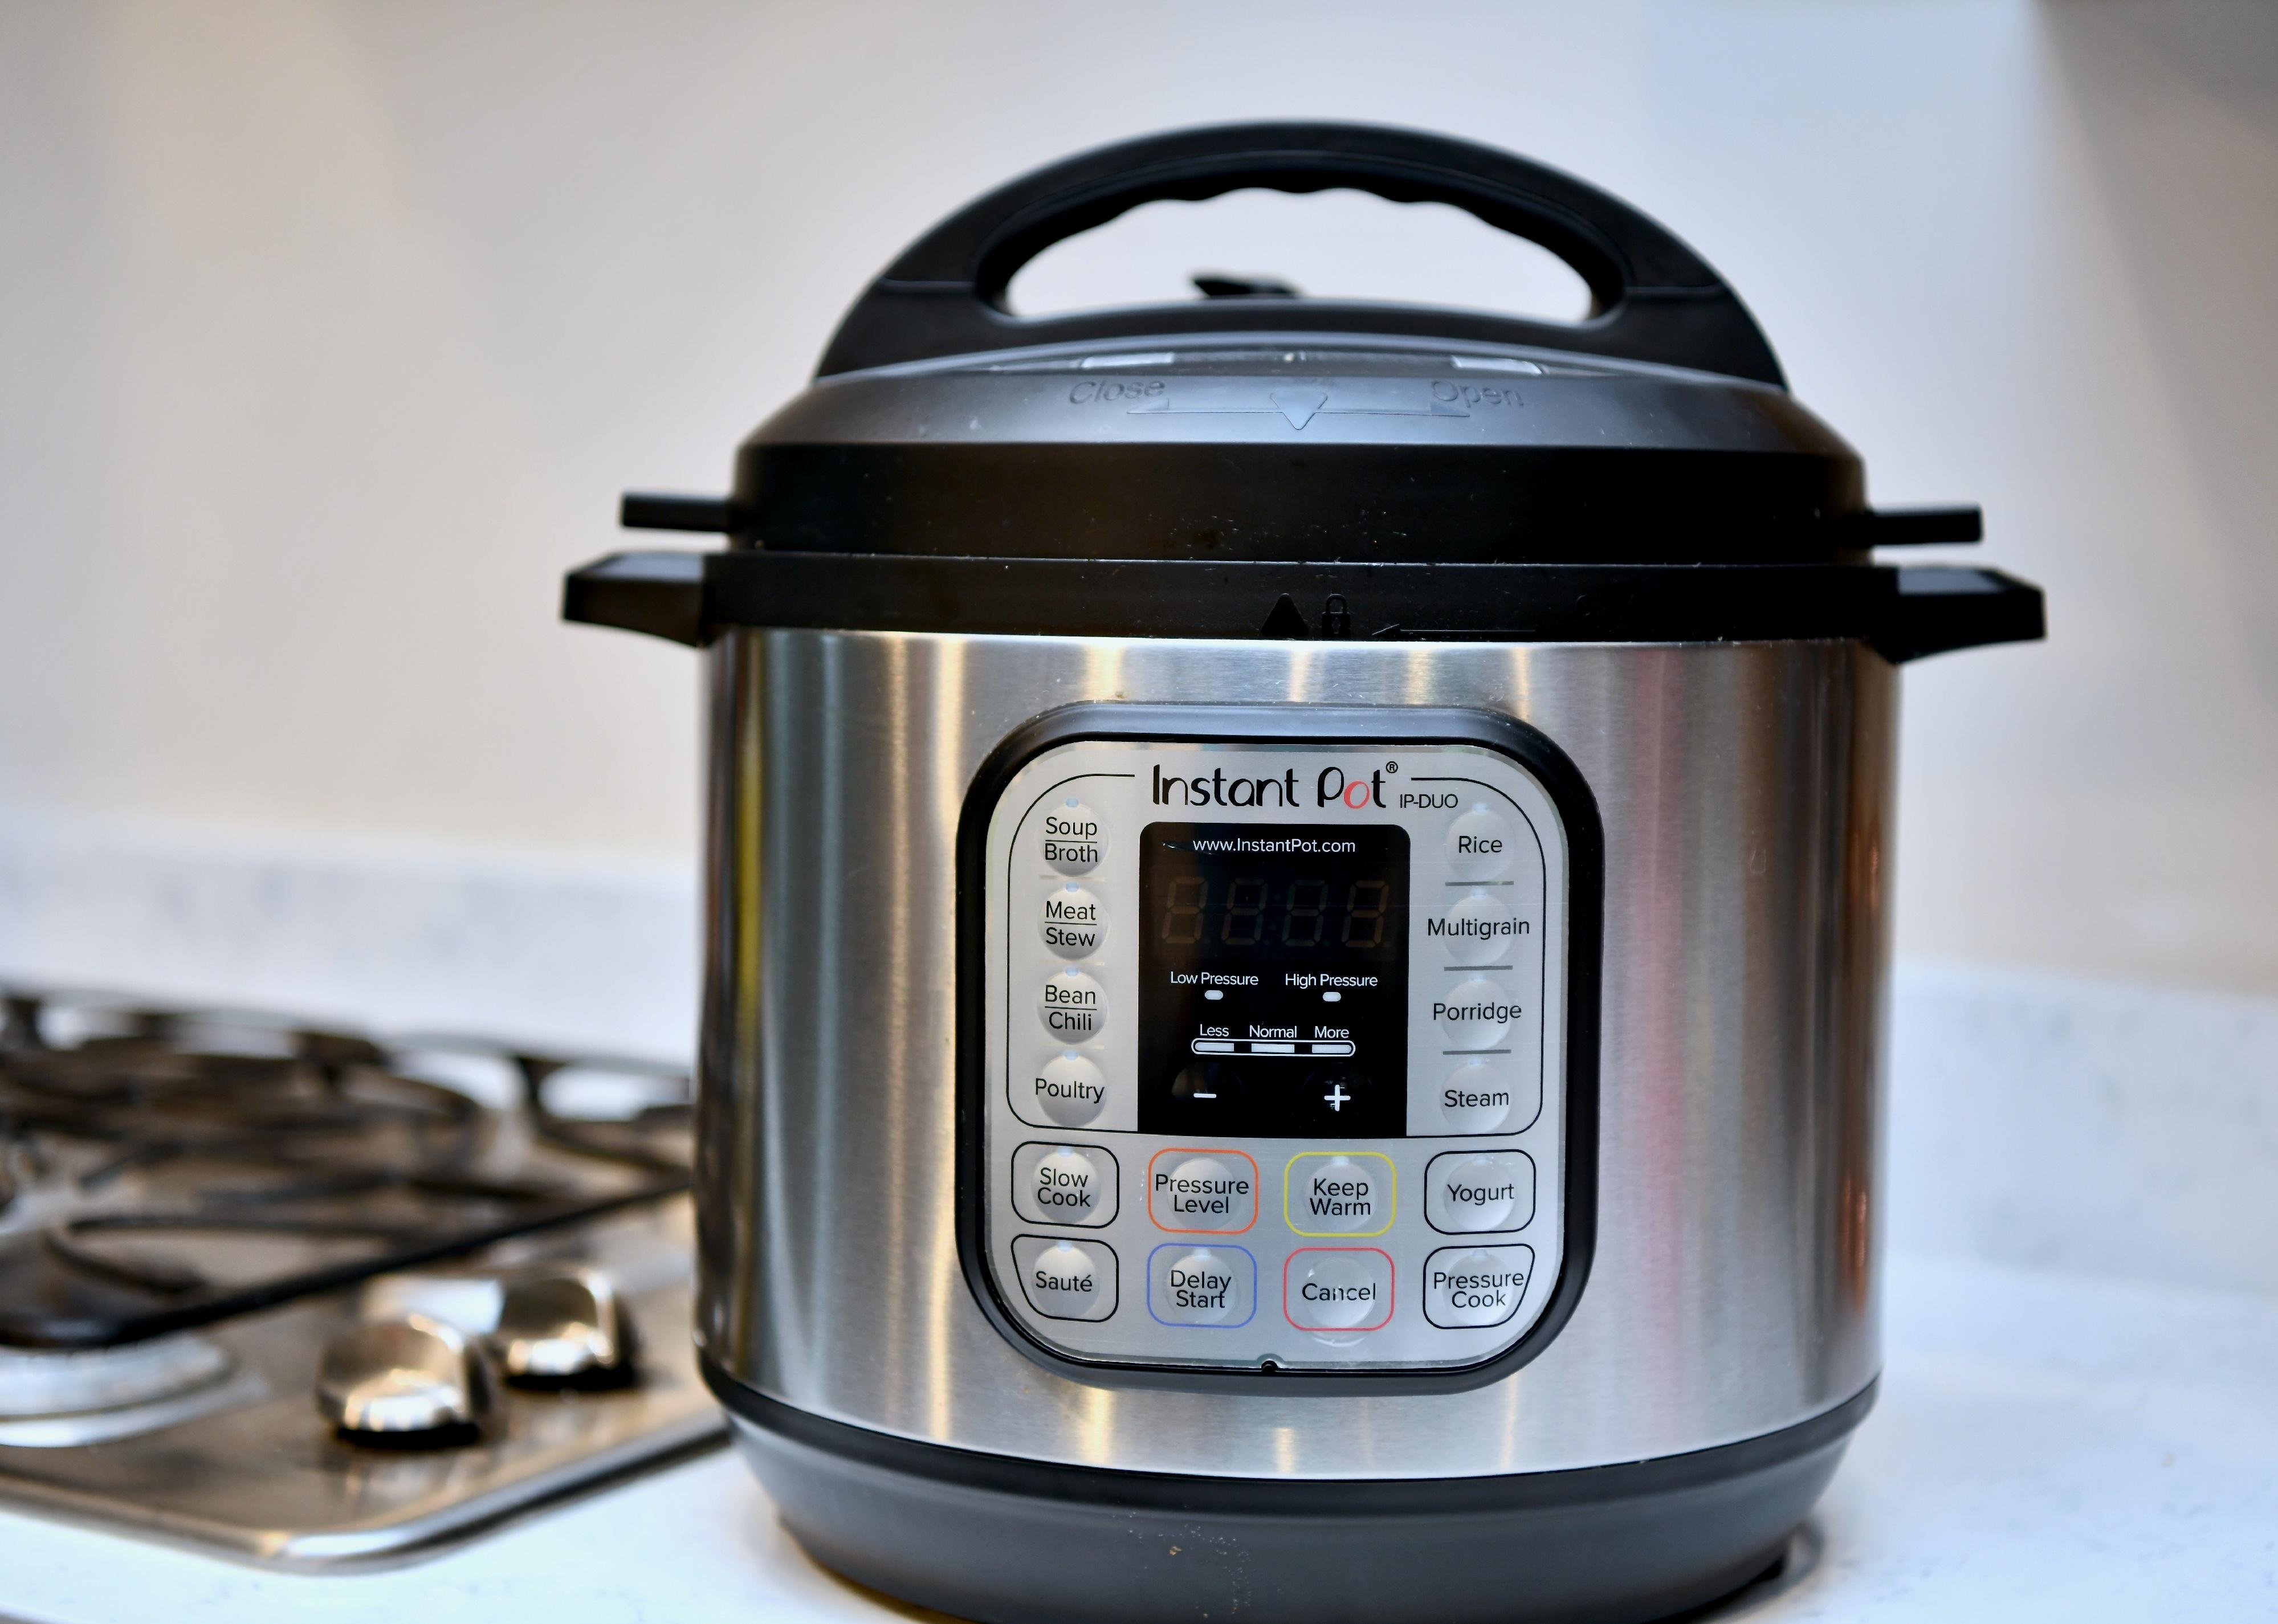 Instant Pot on counter next to stove.